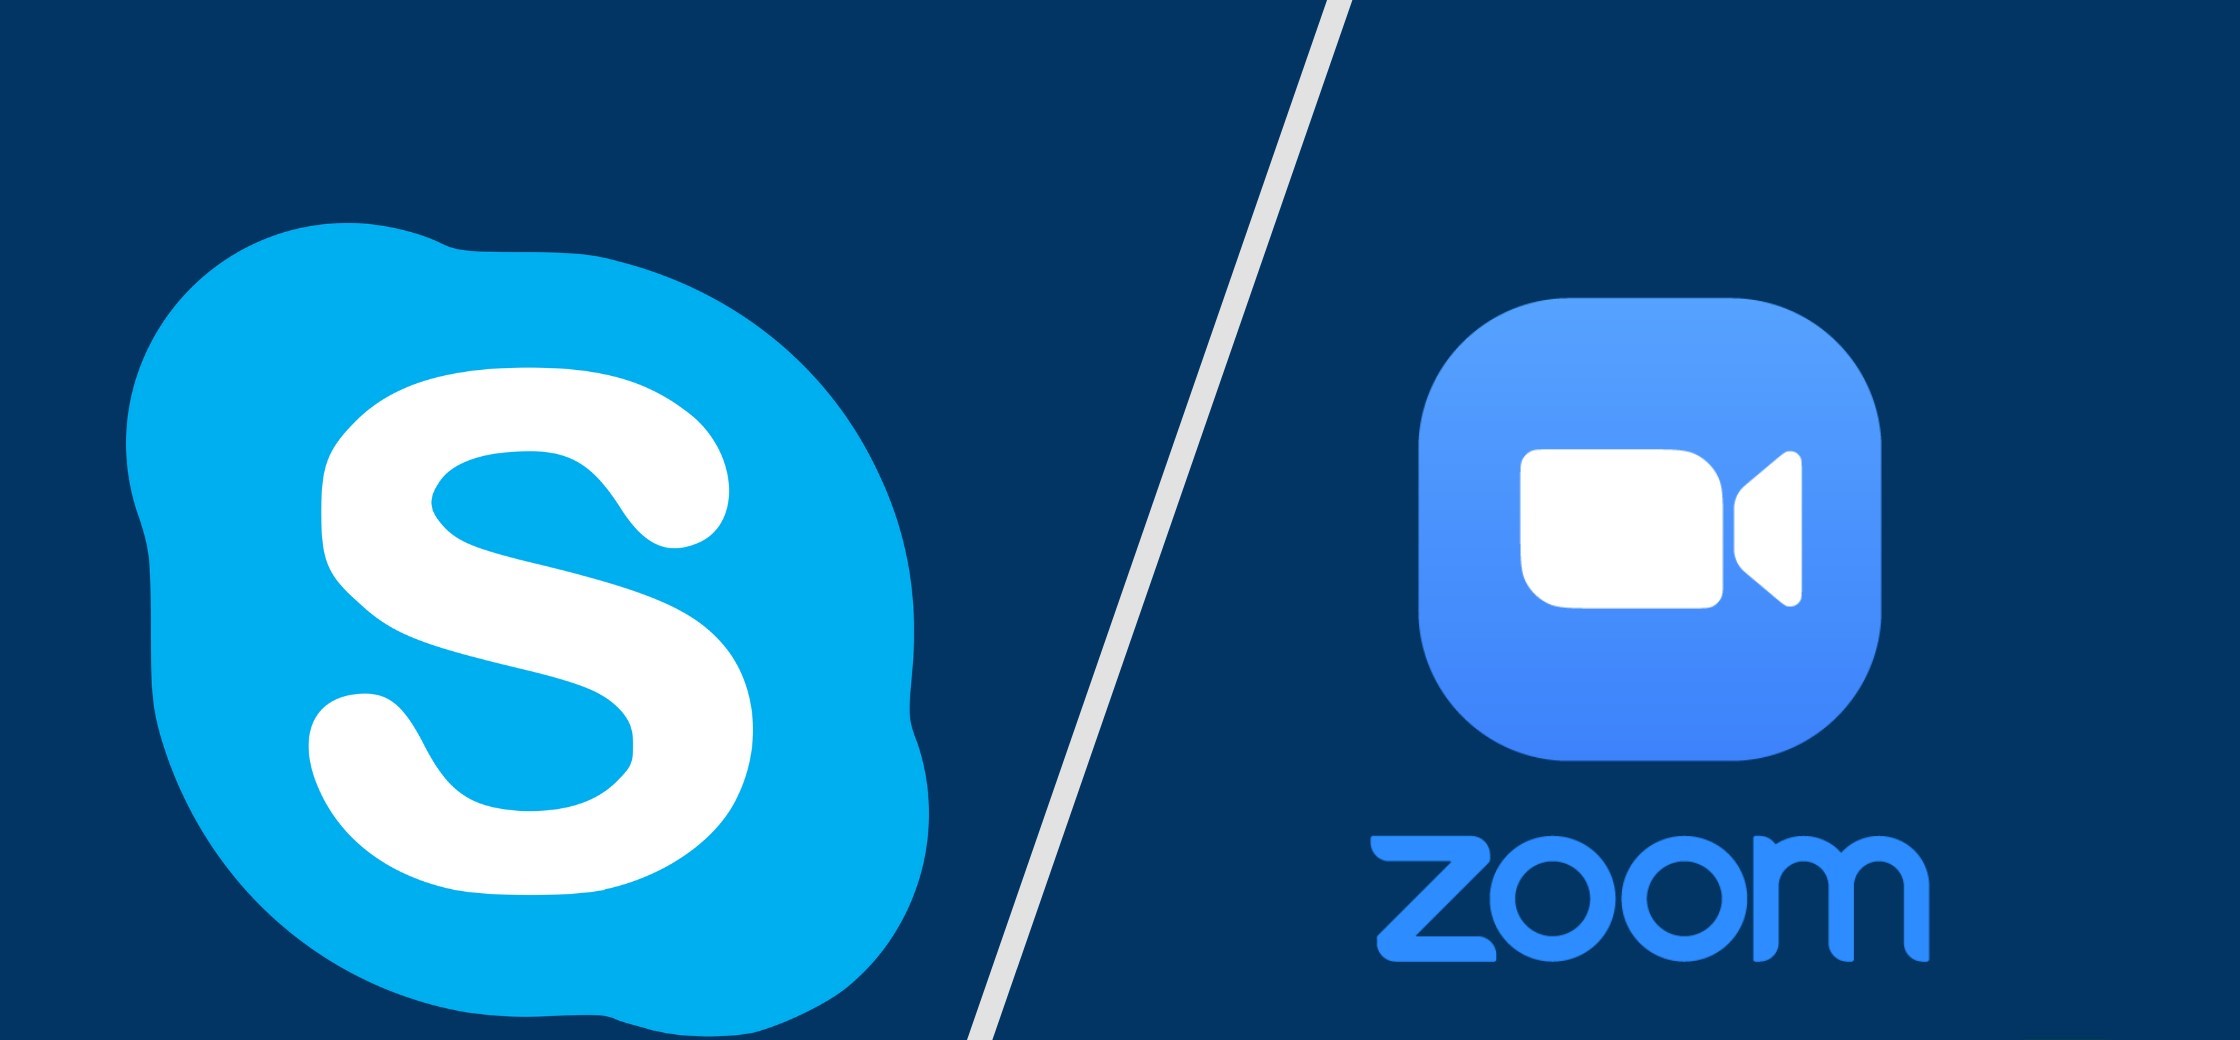 Zoom Vs. Skype: What’s The Difference?